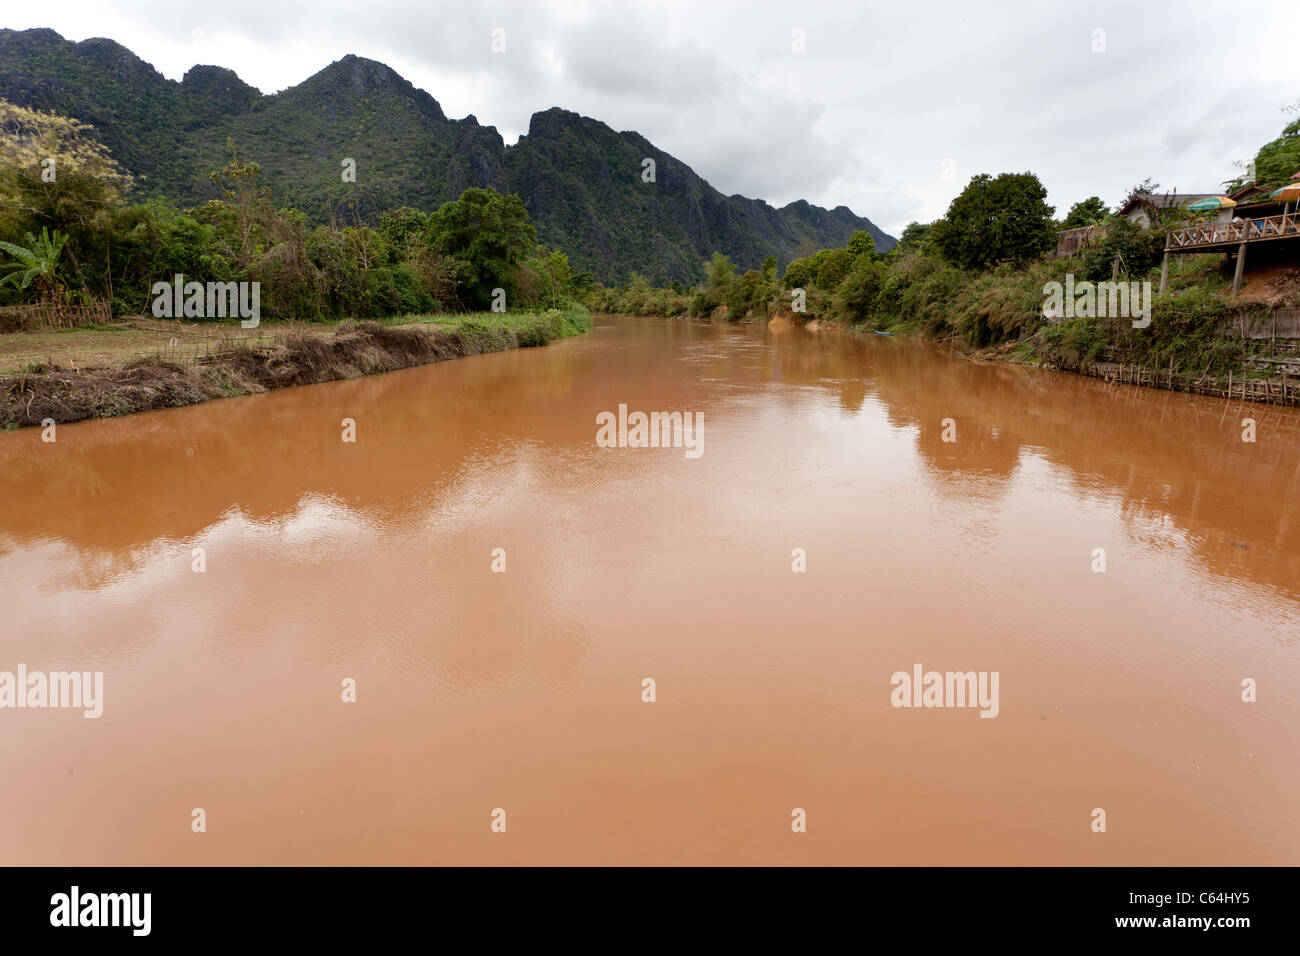 Nam Song river under cloudy weather in vang vieng, laos Stock Photo